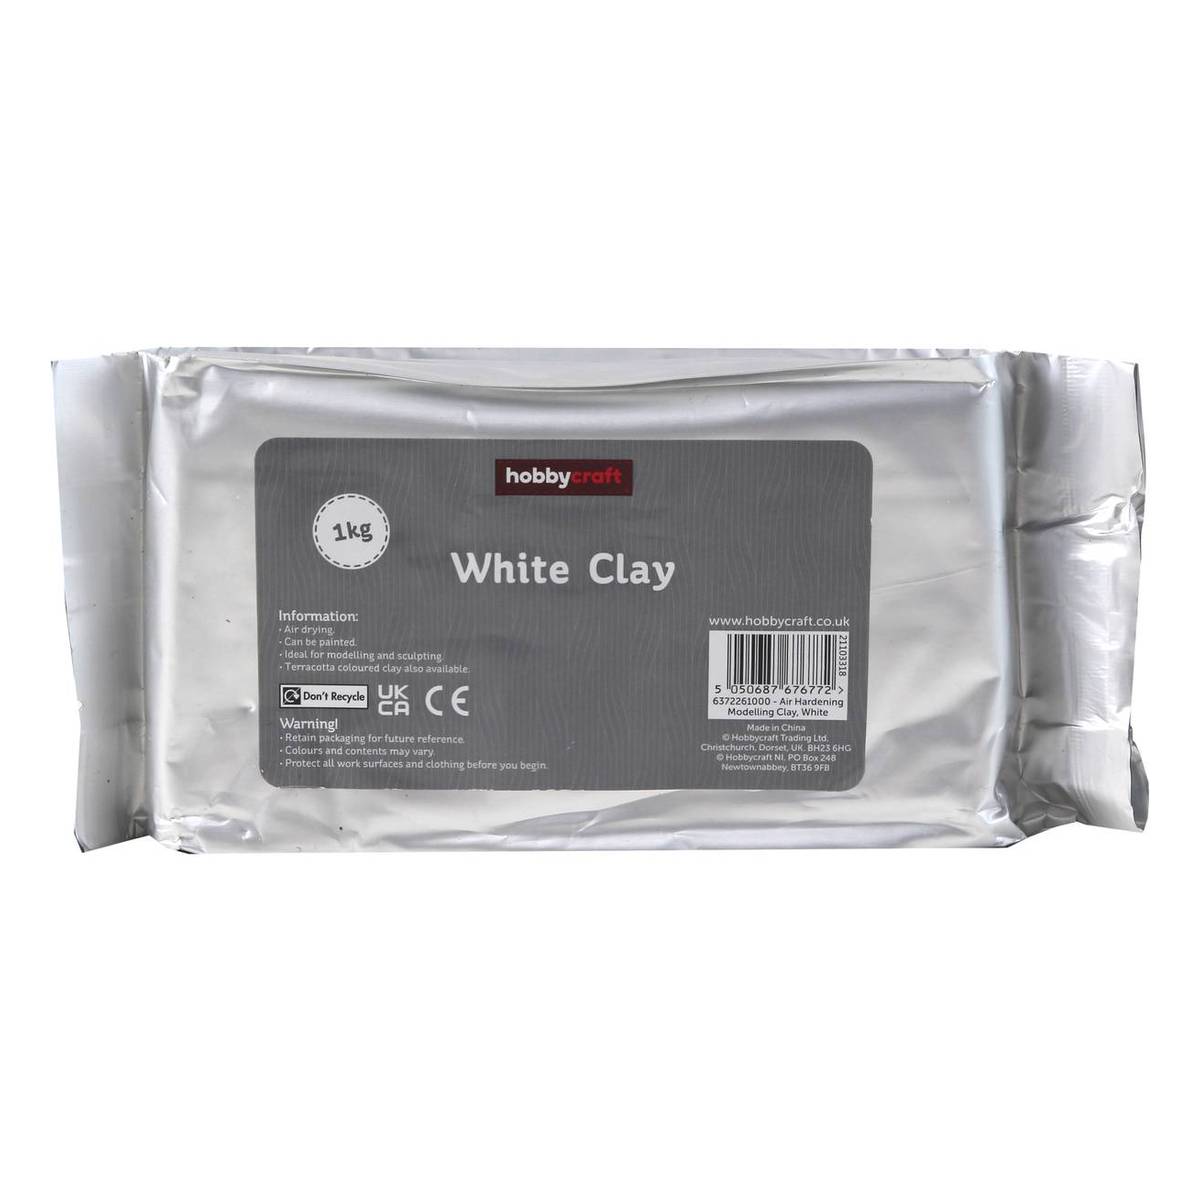 Dala White Air-Drying Clay 500g, Hobby & Craft Accessories, Hobbies &  Crafts, Stationery & Newsagent, Household